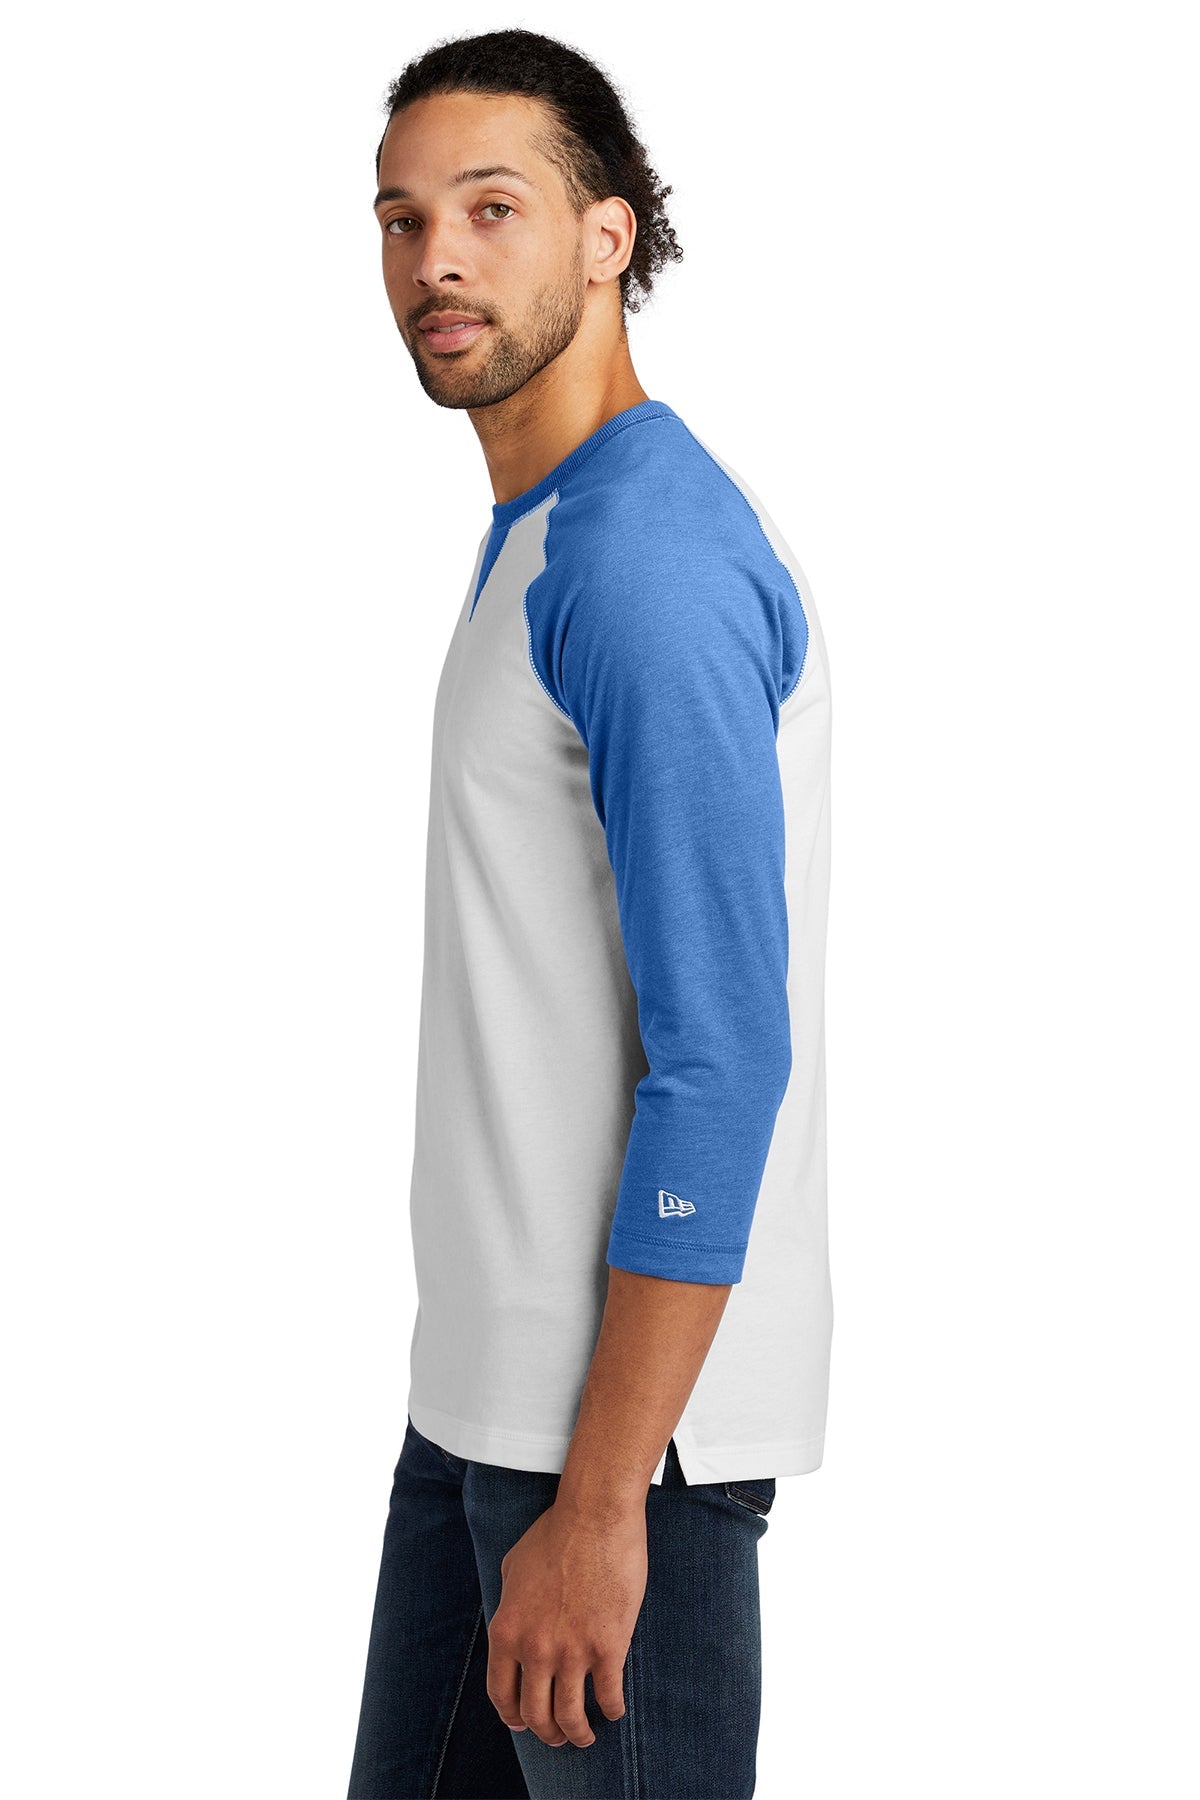 New Era Sueded Cotton 3/4-Sleeve Printed Tee's, Royal Heather/ White